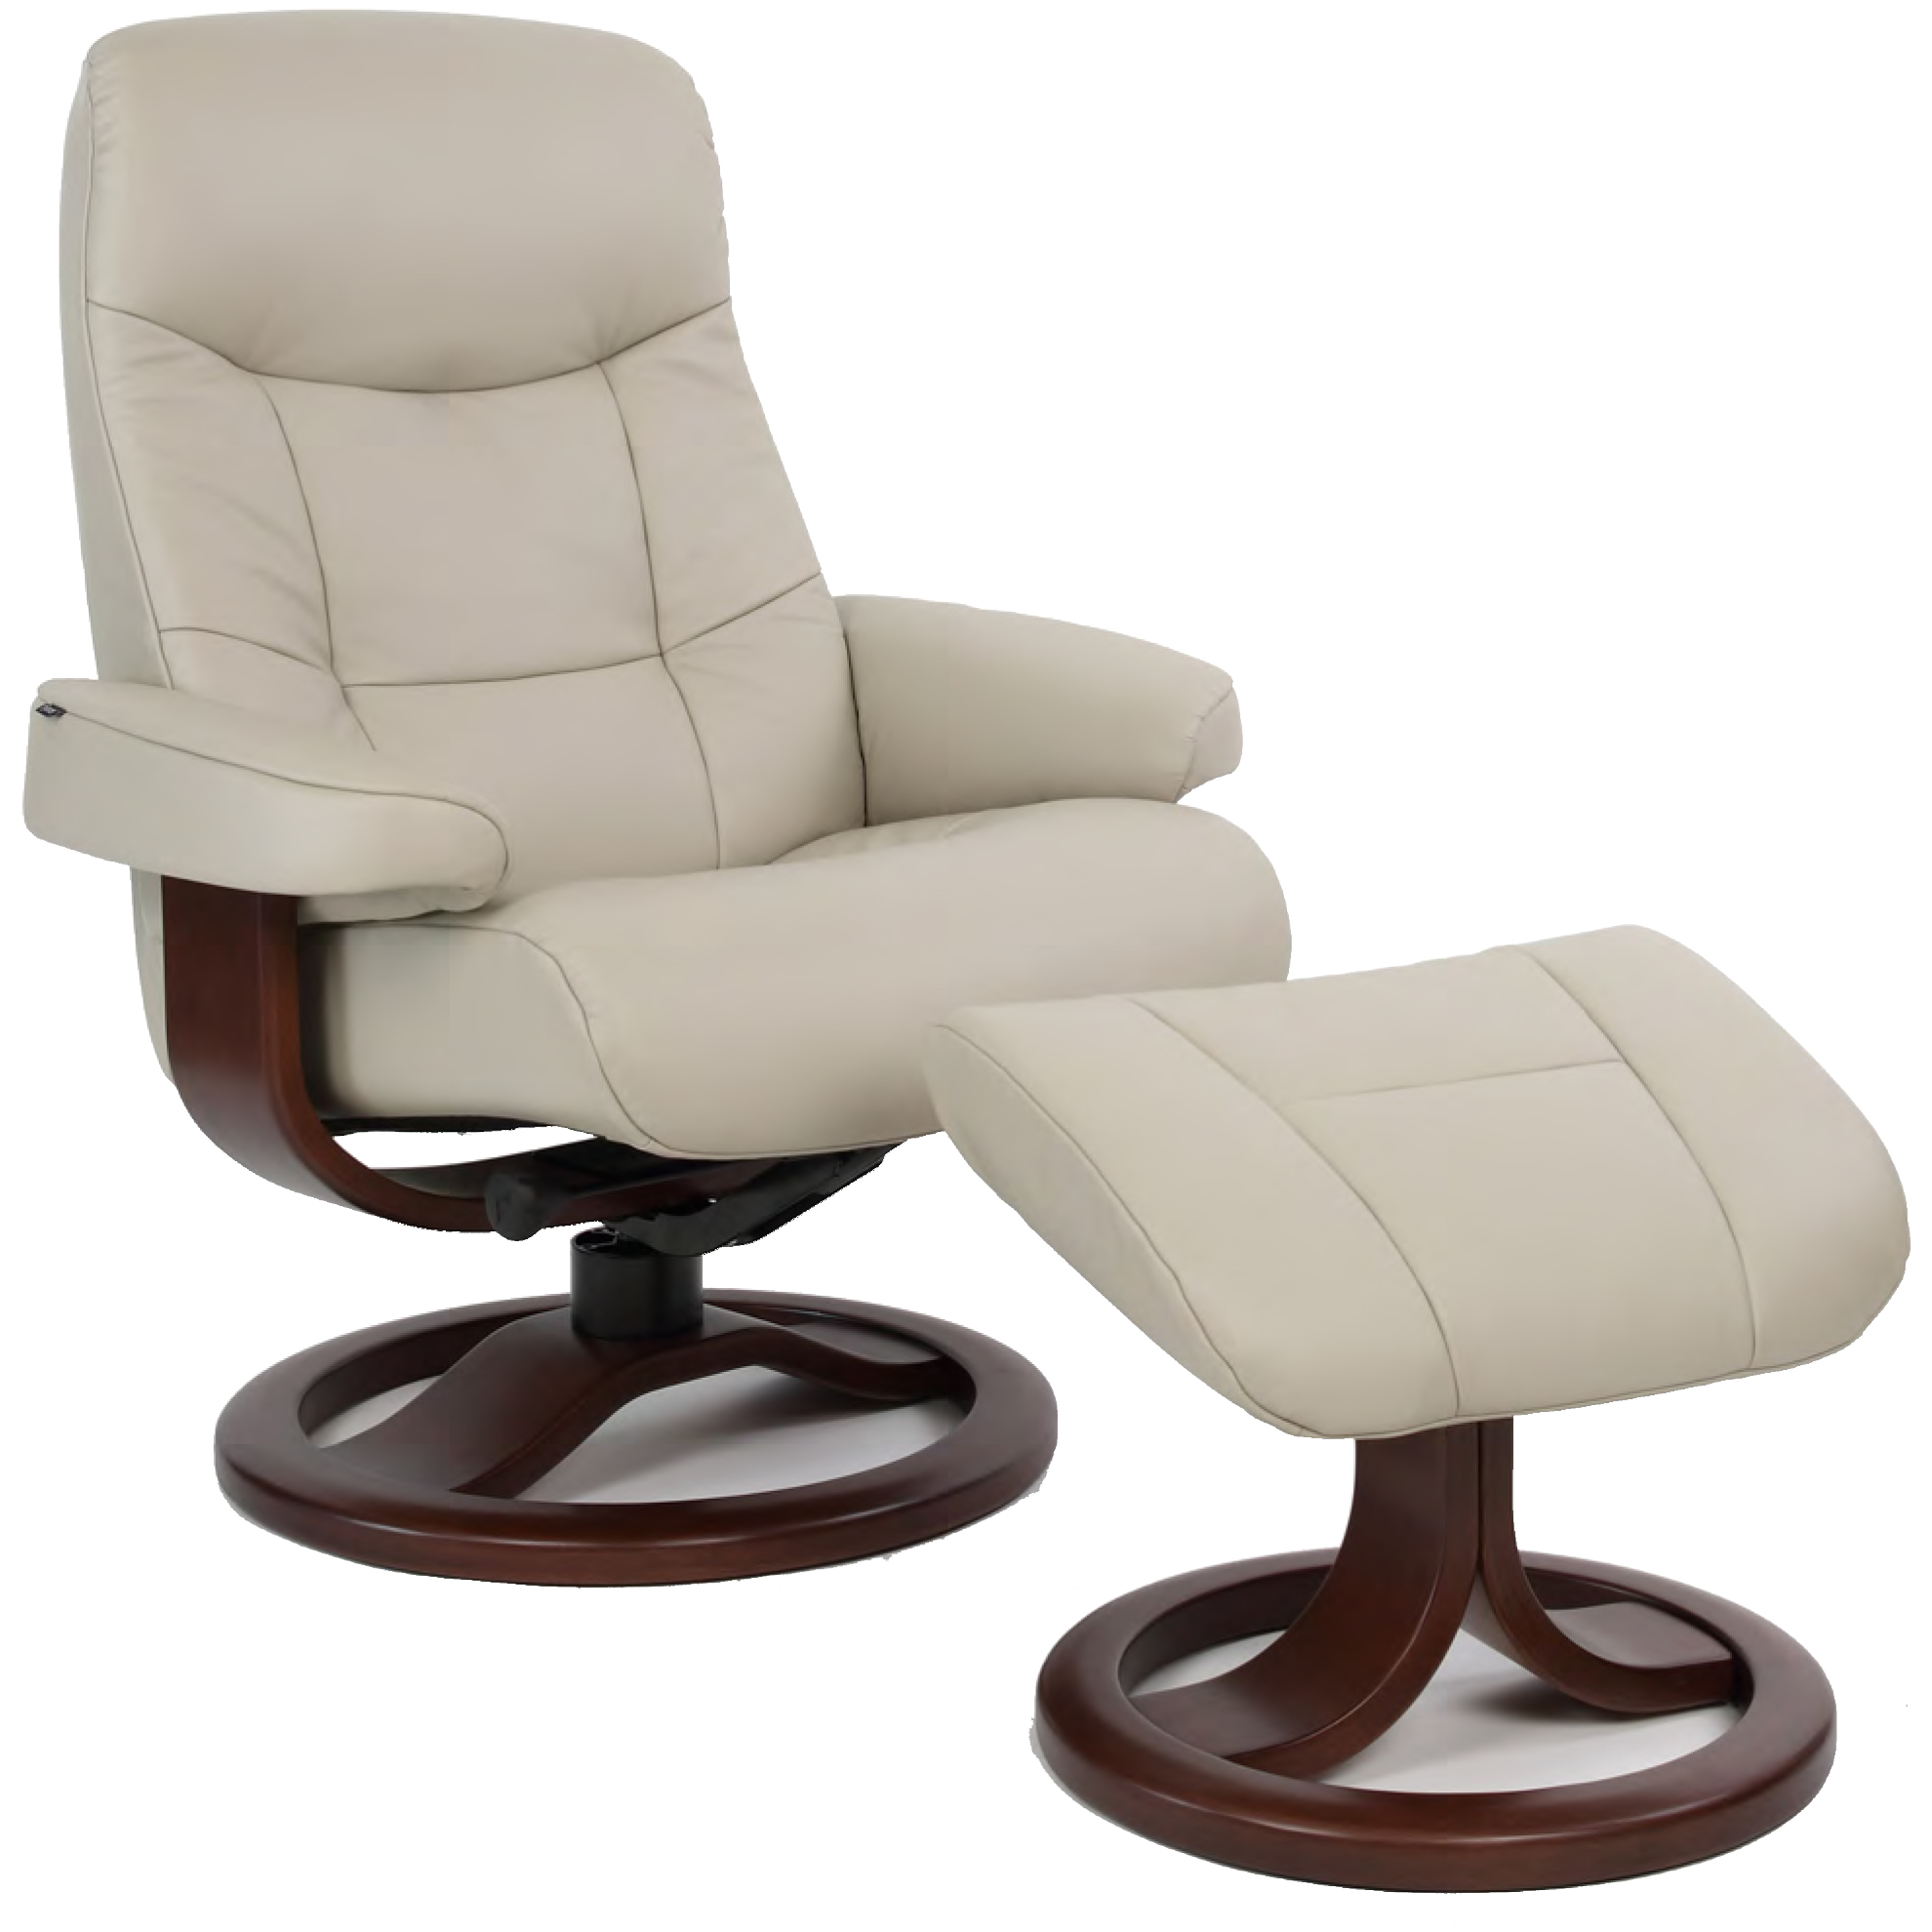 Fjords 215 Muldal Ergonomic Leather Recliner Chair